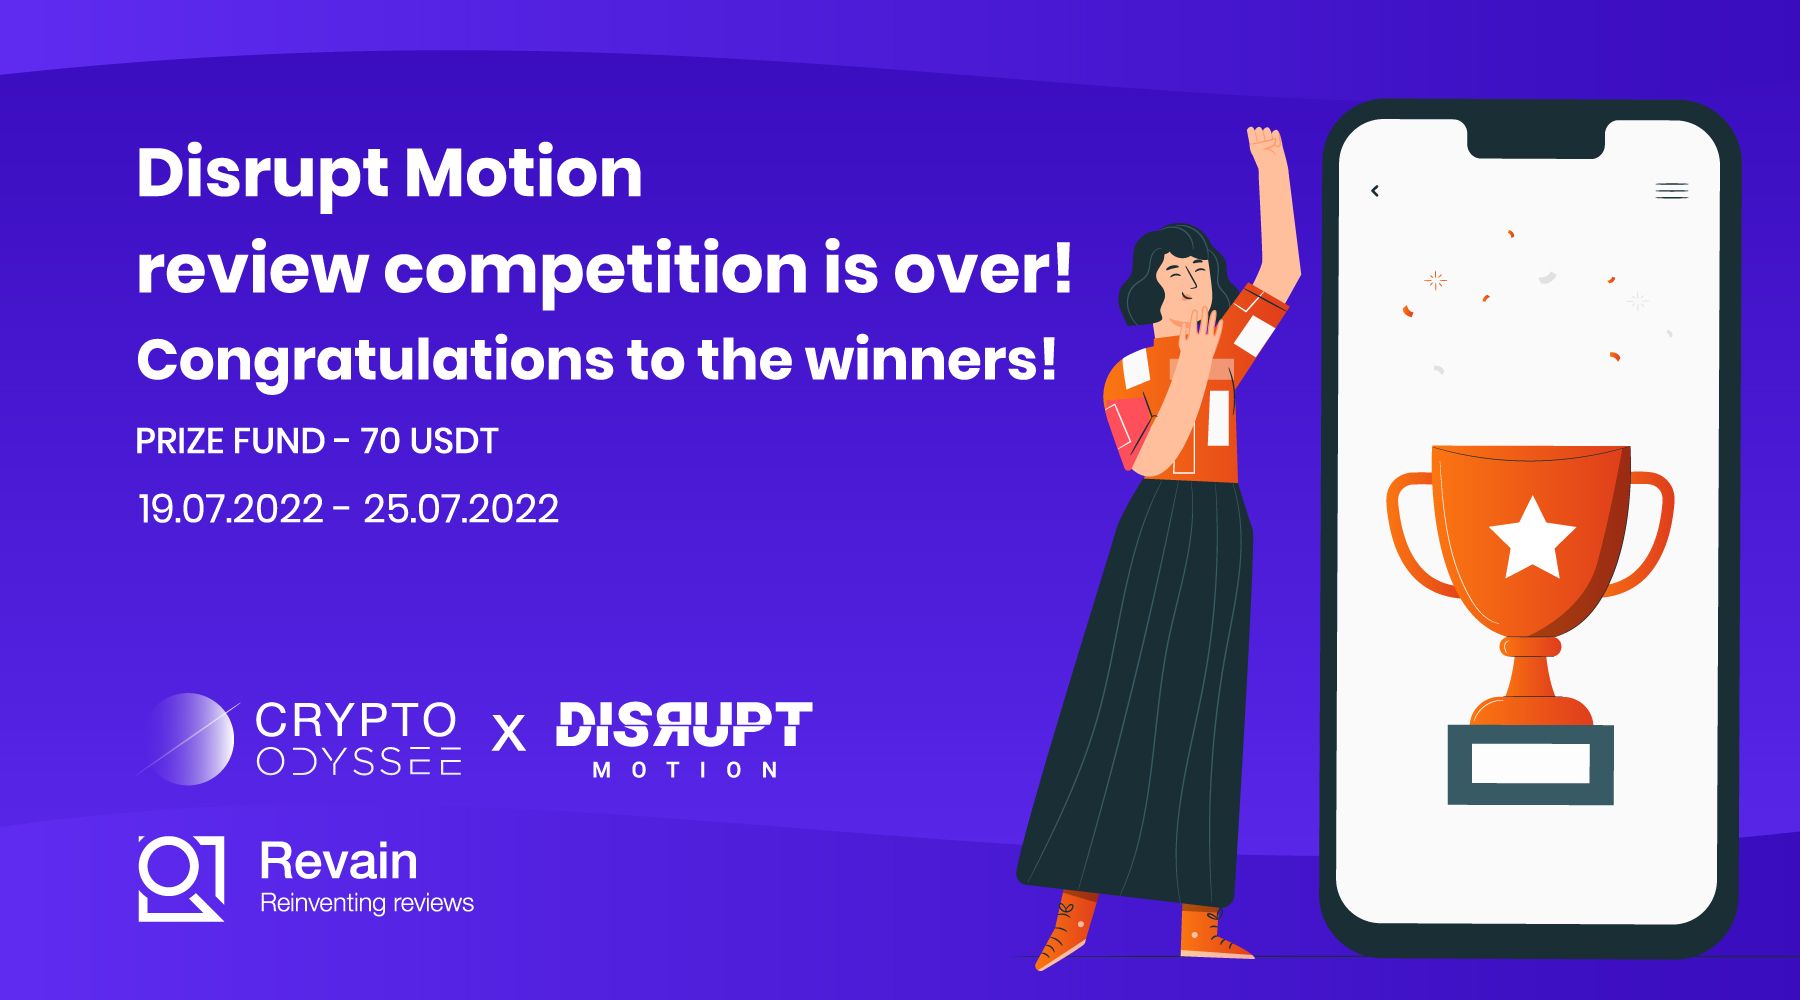 Article Disrupt Motion review competition is over!